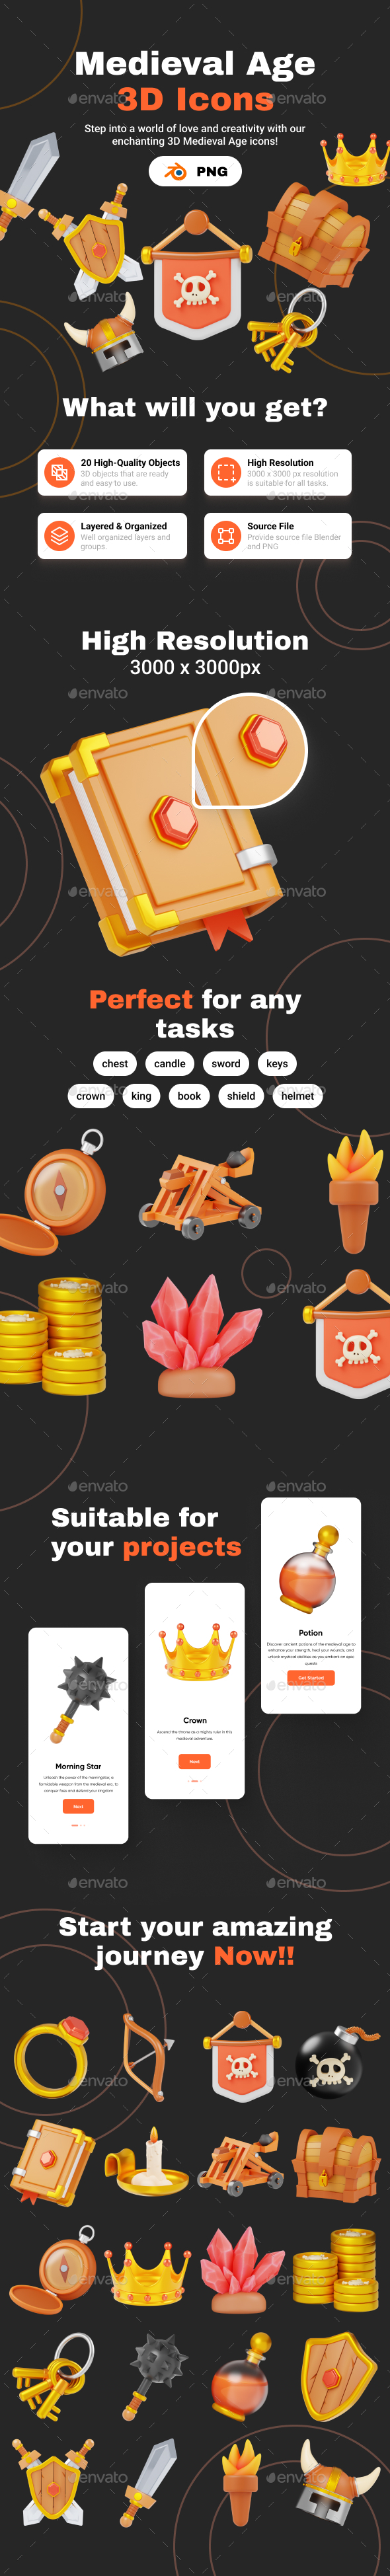 Medieval Age 3D Icon Pack